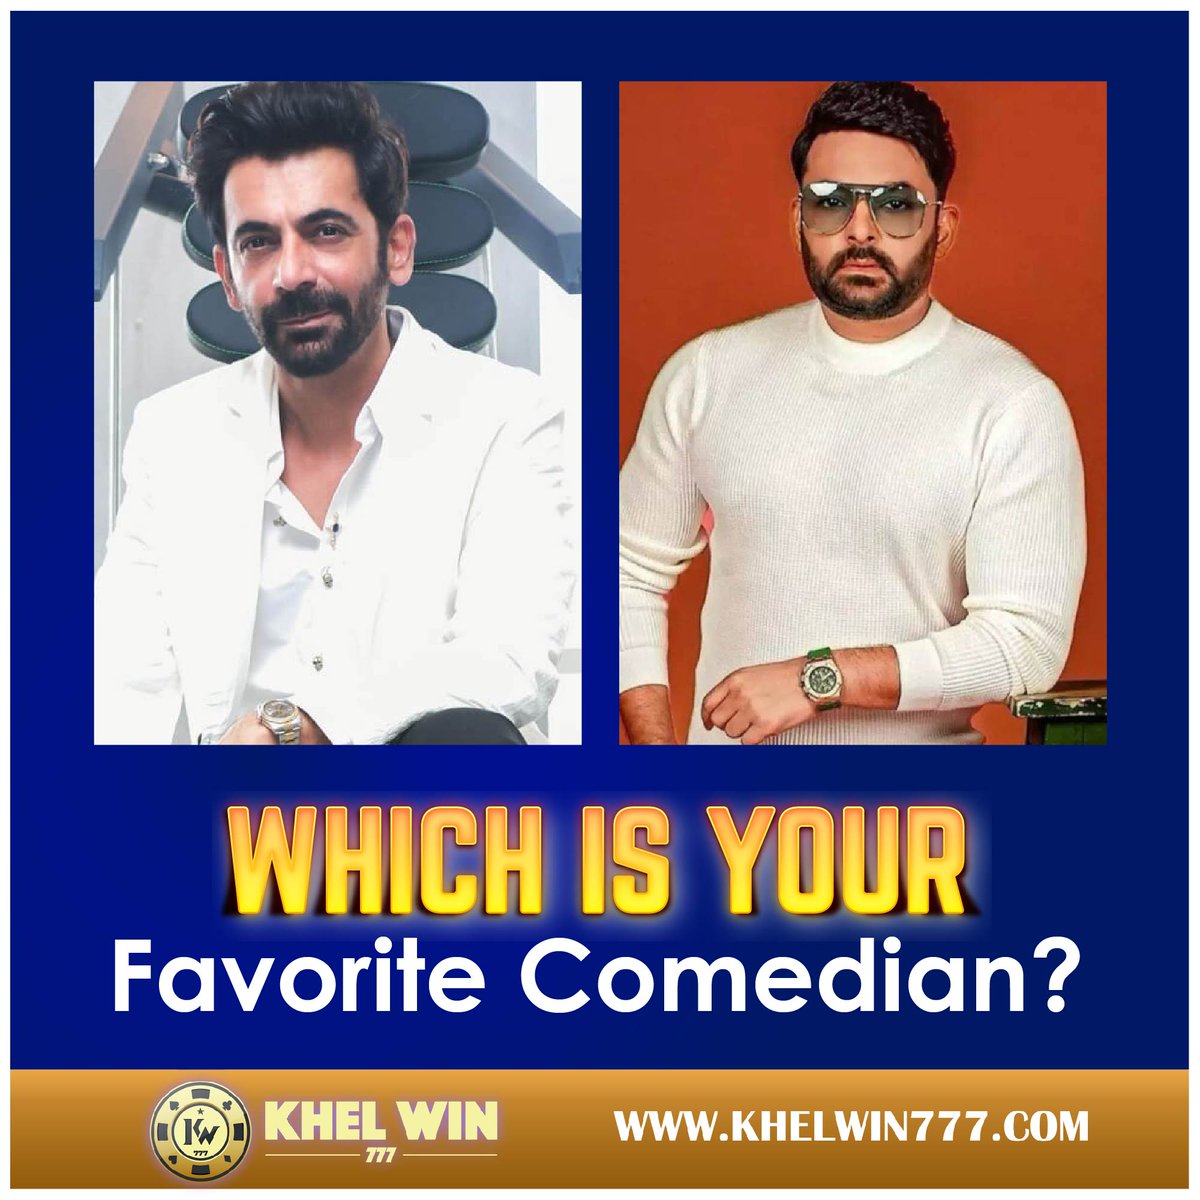 Who is your Favourite Comedian? Comment down!!
#sunilgrover #kapilsharma #indiancomedy #favouritecomedian